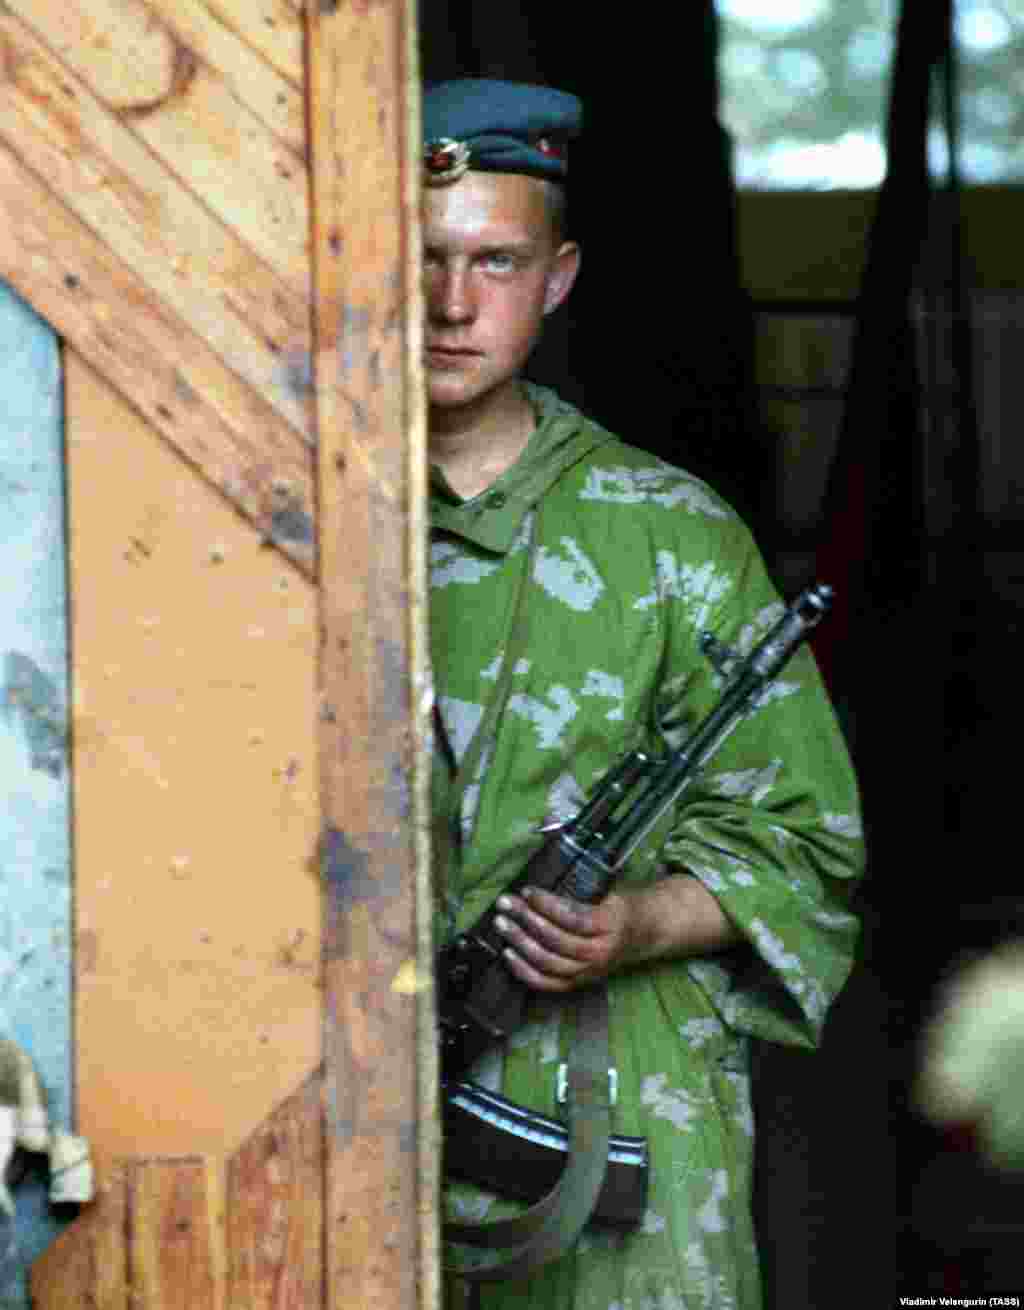 A Russian paratrooper in Abkhazia during the conflict. Russia&rsquo;s involvement was a complex one. Moscow publicly backed the Georgian cause, while on the ground many Russian commanders sided with the Abkhaz. According to one report, as Russian jets bombed Georgian positions in Sukhumi, other Russian units were supplying Georgian troops with weapons. &nbsp; &nbsp;